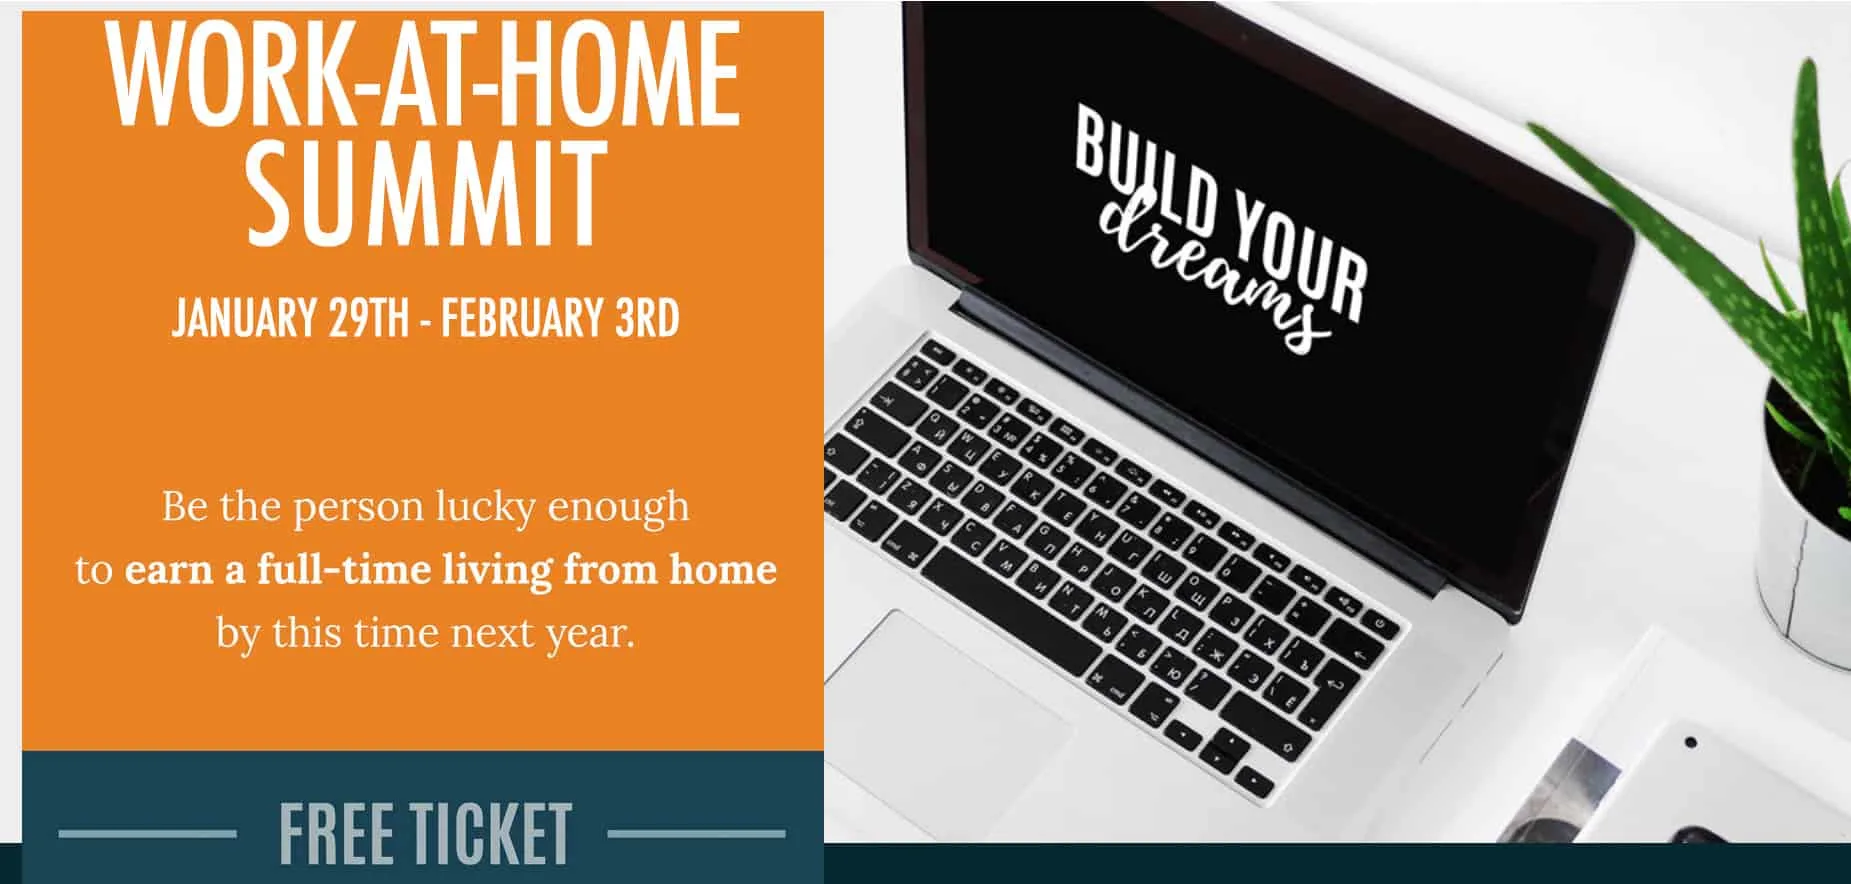 Want to learn the secrets to working from home? From January 29, 2018 to February 3, 2018, you'll learn from Caitlin and 45 other experts on how you can work from home this year. | work at home | www.travelingwellforless.com